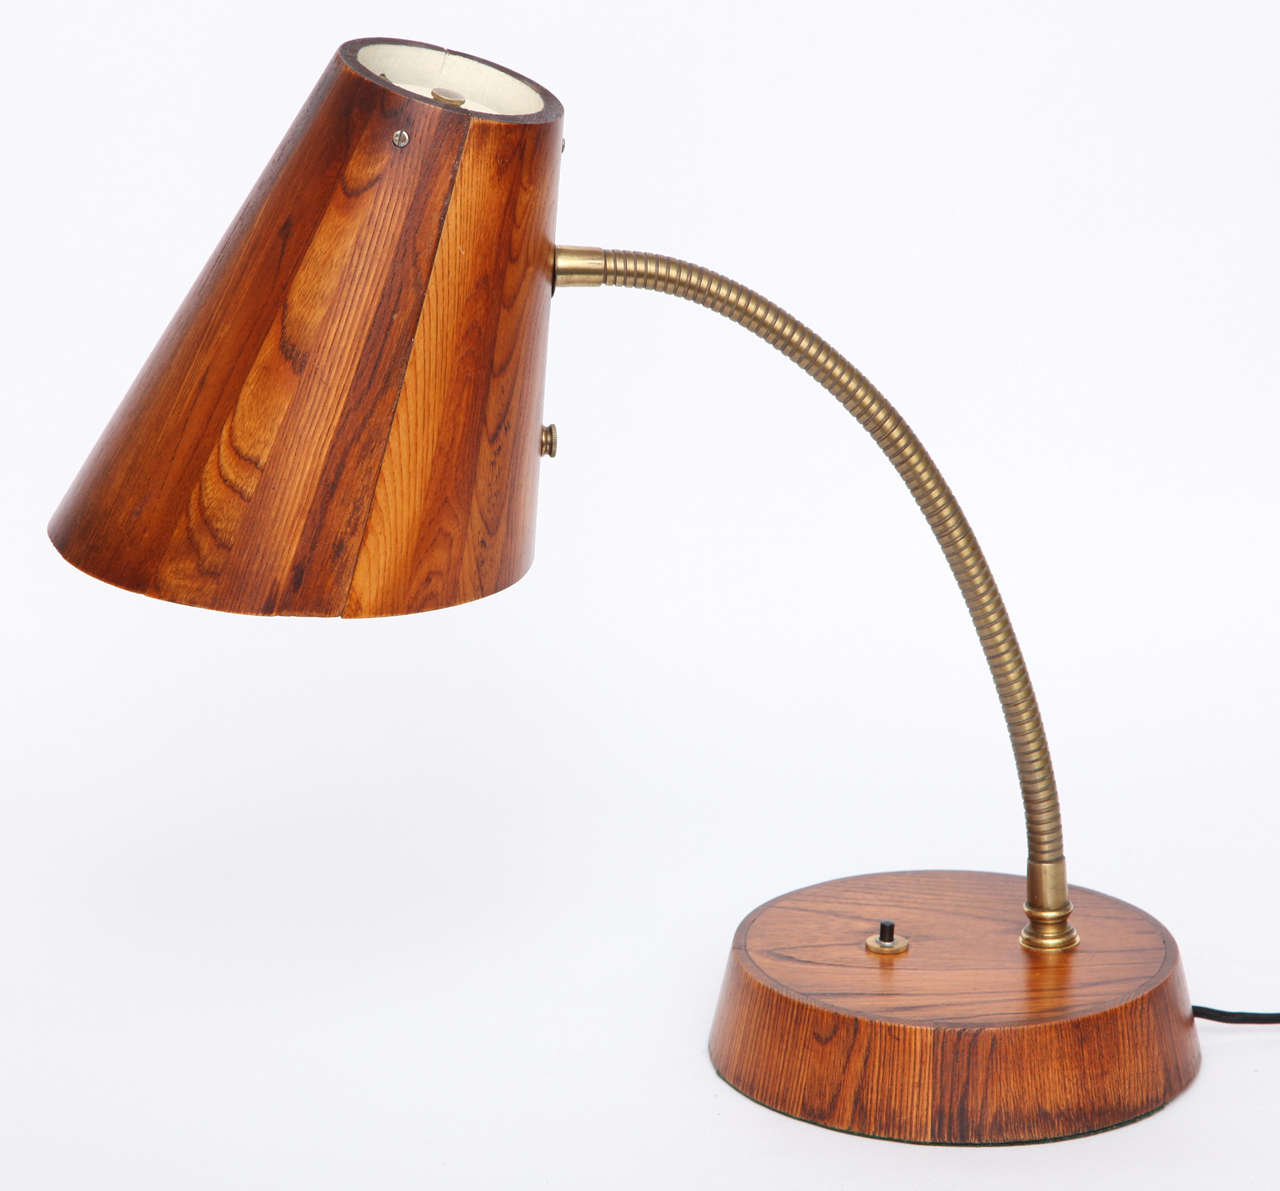 Table Lamp Articulated Mid Century Modern wood and brass 1940's
New socket and rewired